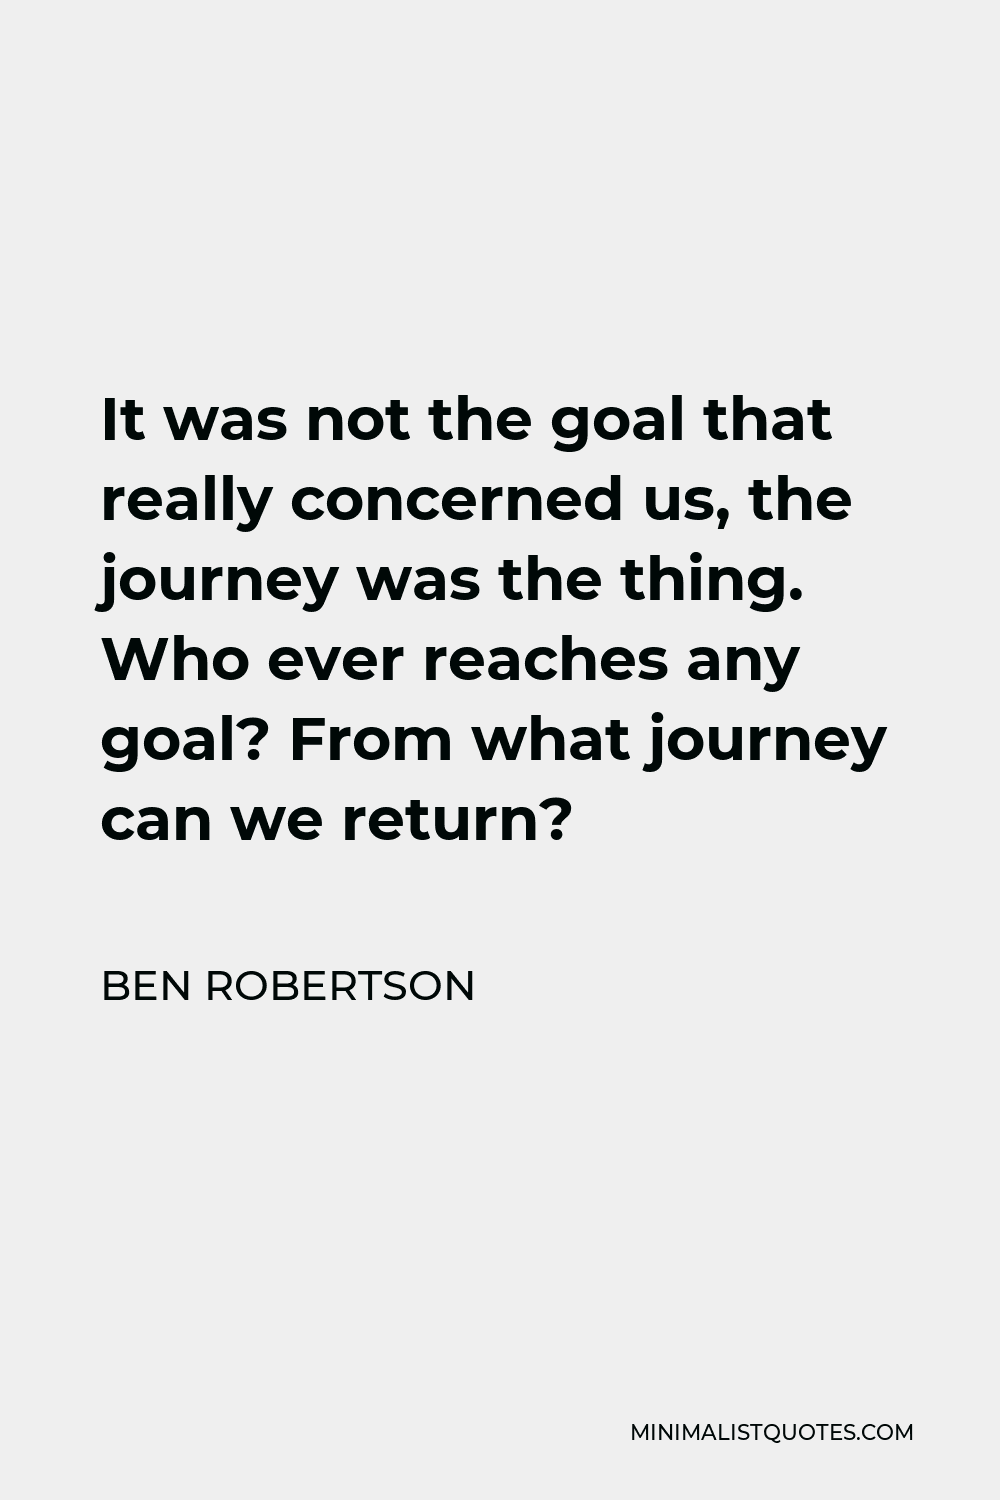 Ben Robertson Quote - It was not the goal that really concerned us, the journey was the thing. Who ever reaches any goal? From what journey can we return?